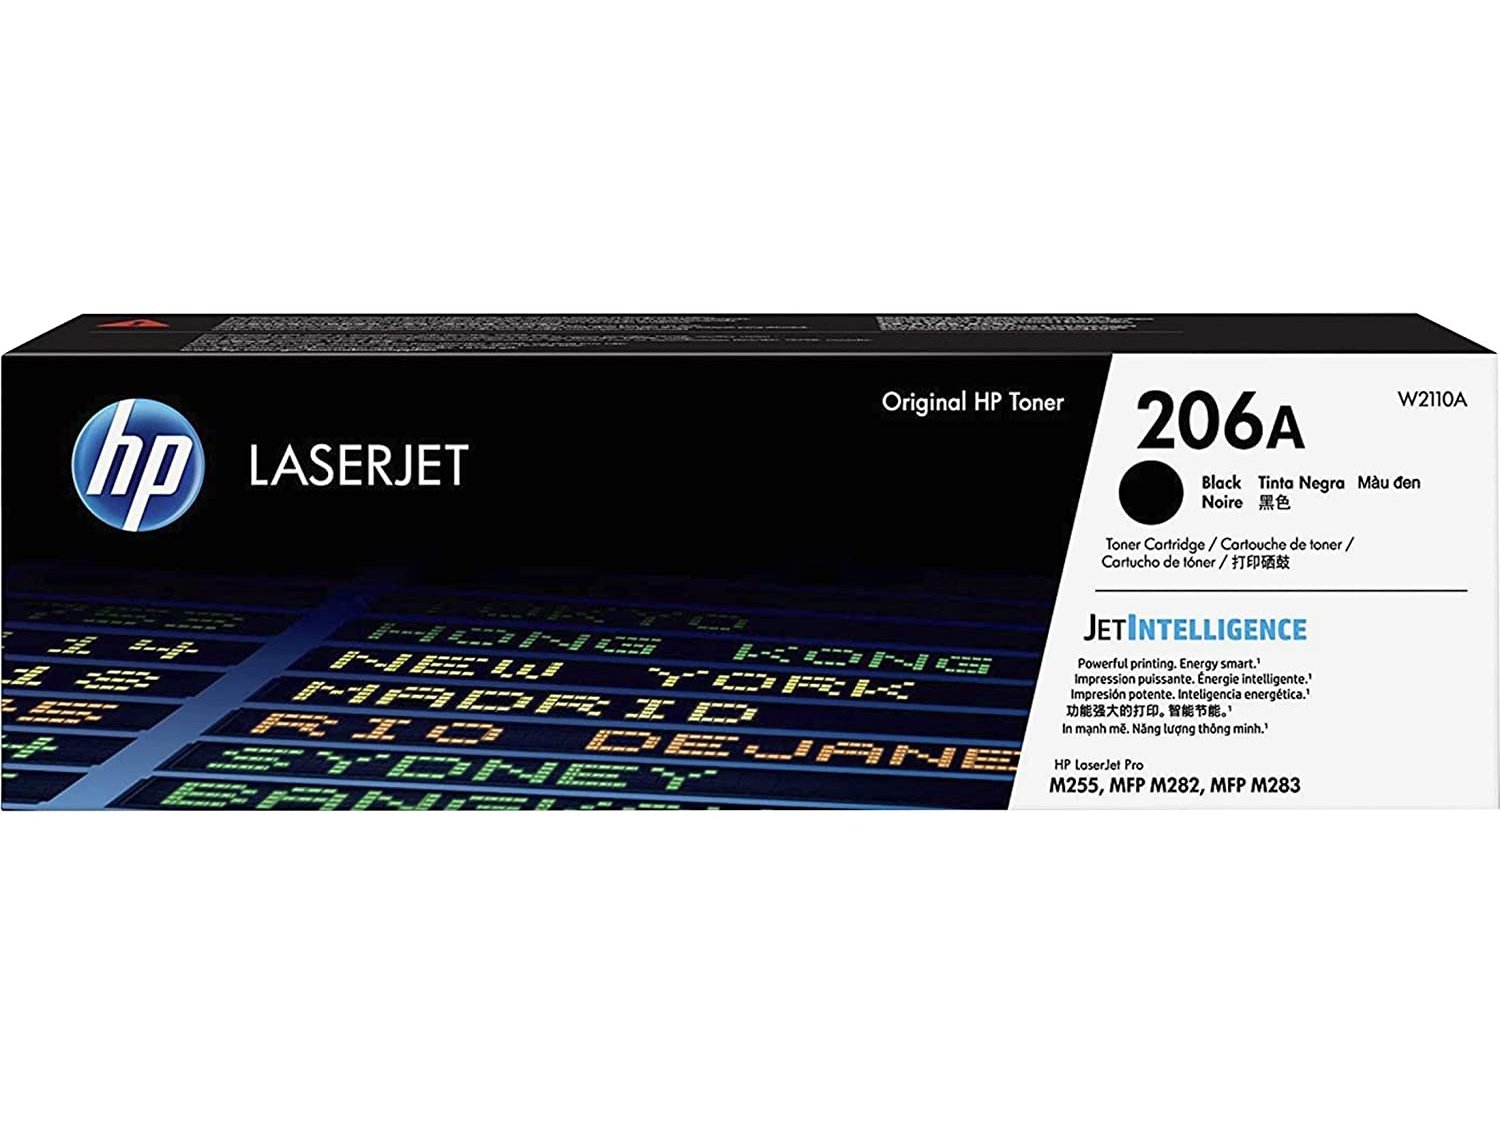 ICU Get Compatible/ OEM HP 206A Black Standard Yield Toner Cartridge (W2110A) - 1350 Page Yield - Ink Cartridges USA